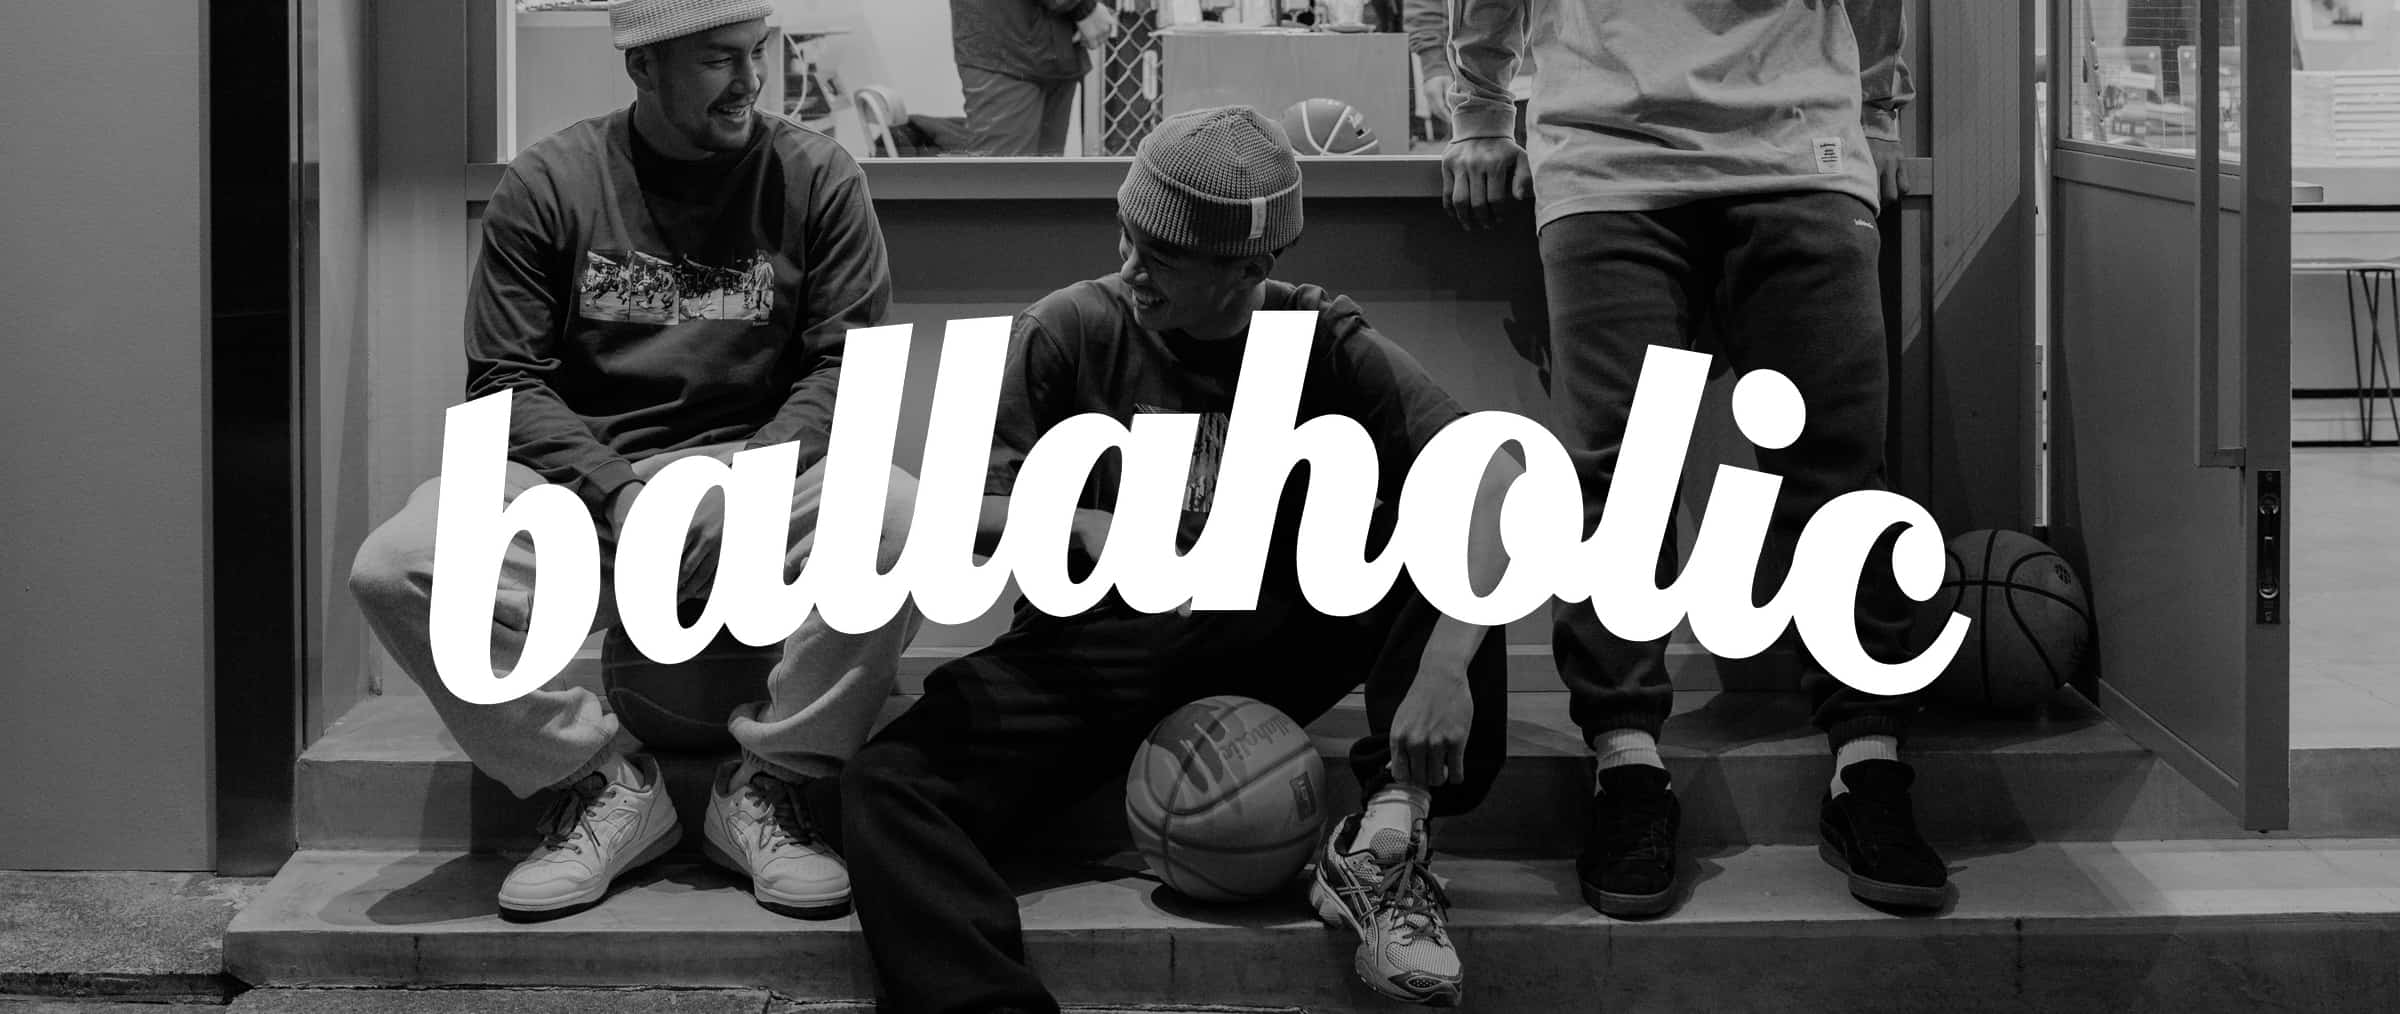 Ballaholic: high-quality products available at KICKZ.com